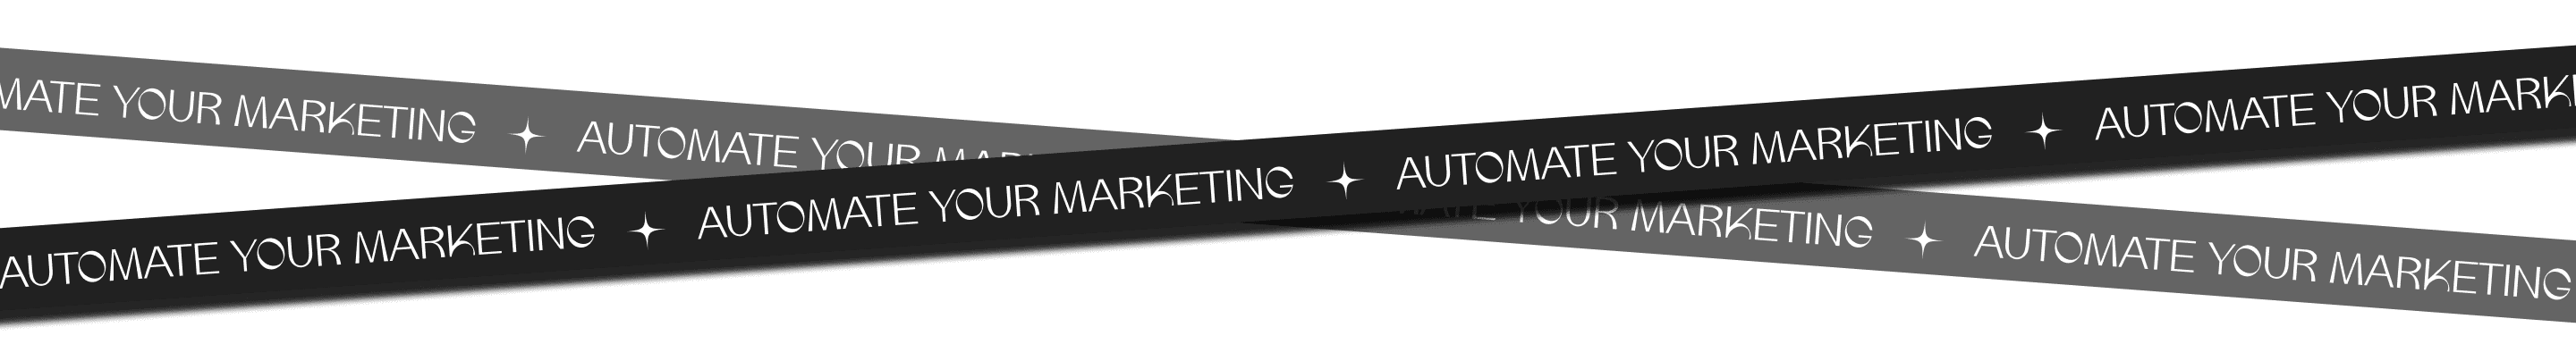 automate-your-marketing